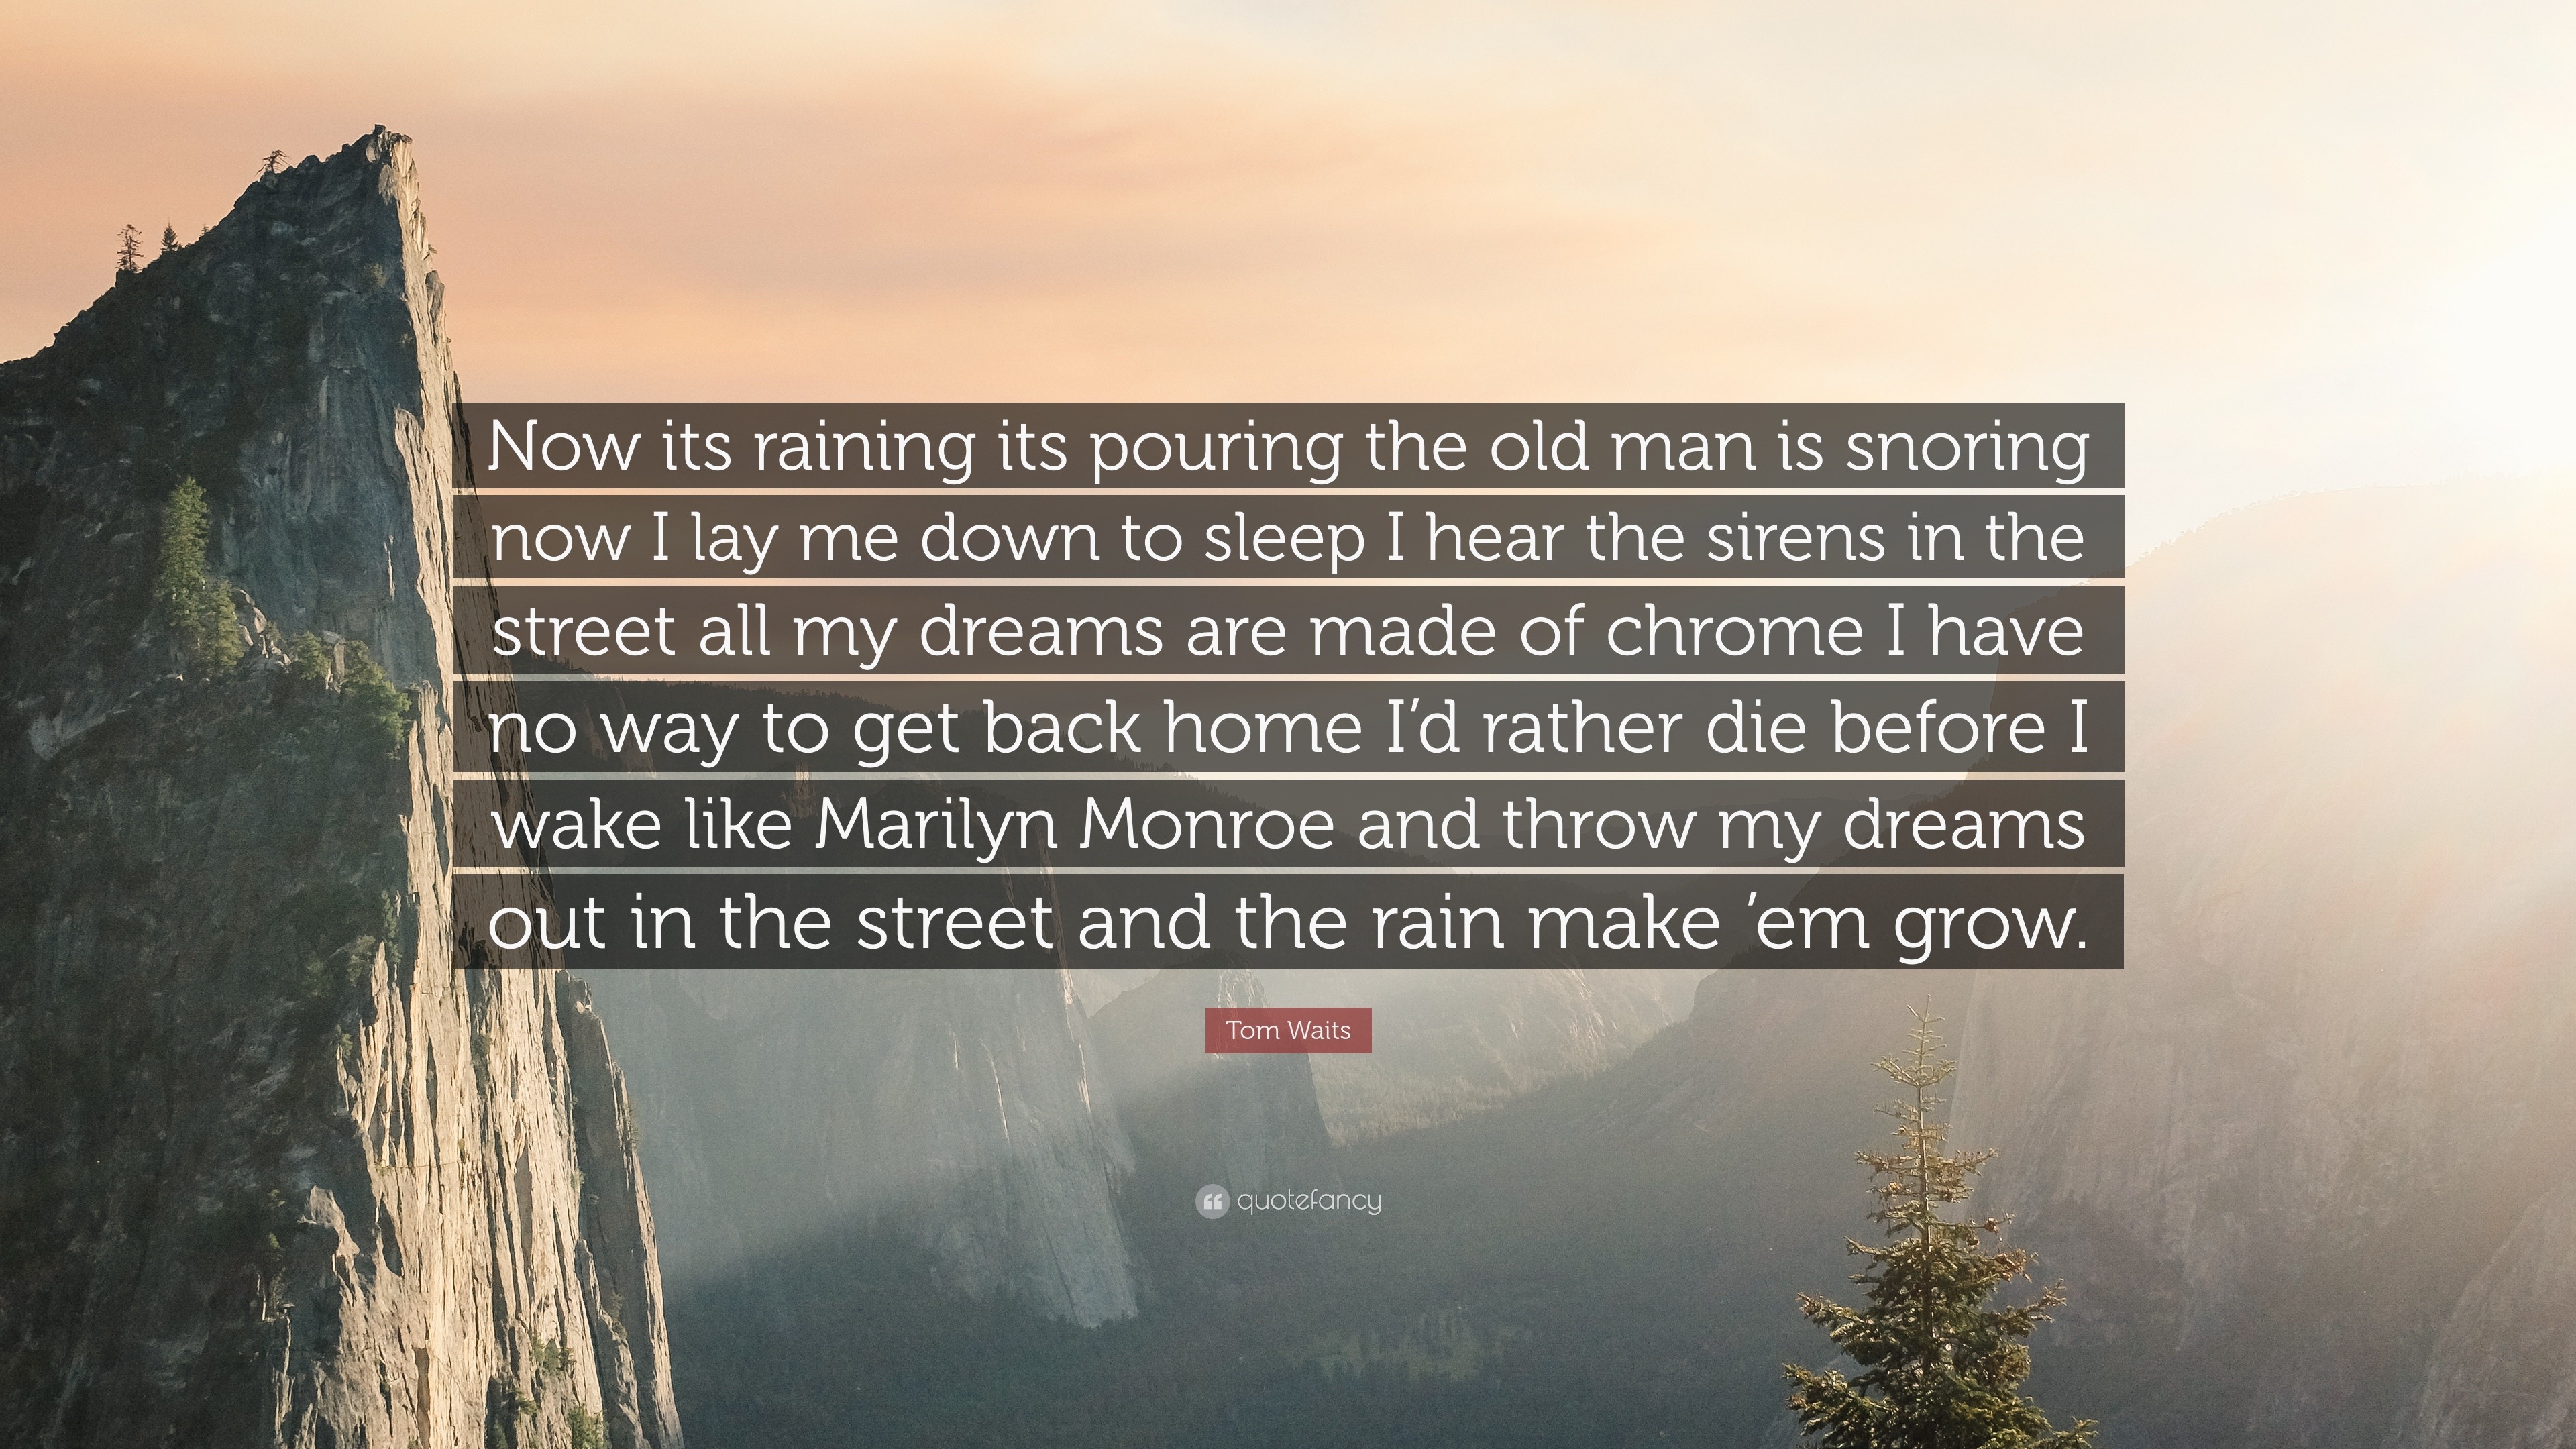 tom waits quote: "now its raining its pouring the old man is